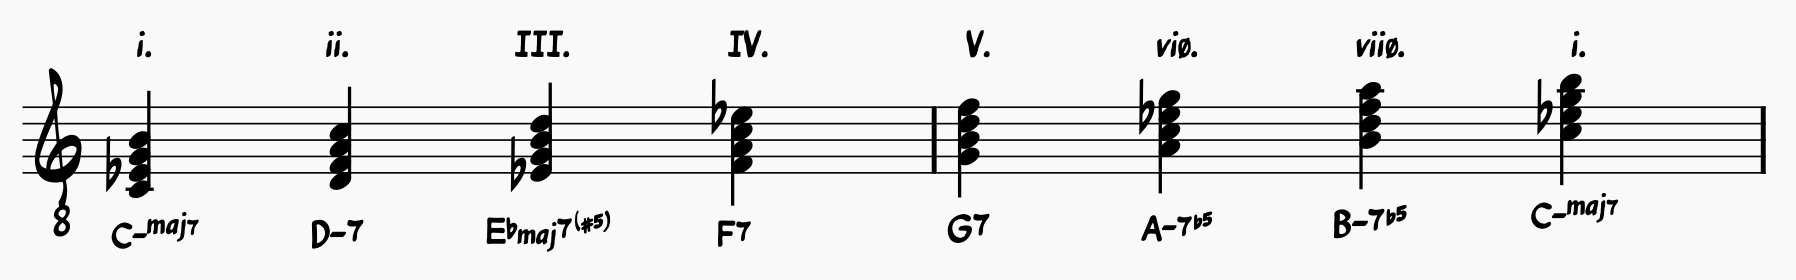 C Melodic Minor Scale Harmonized in 7th Chords with Chord Symbols and Roman Numerals